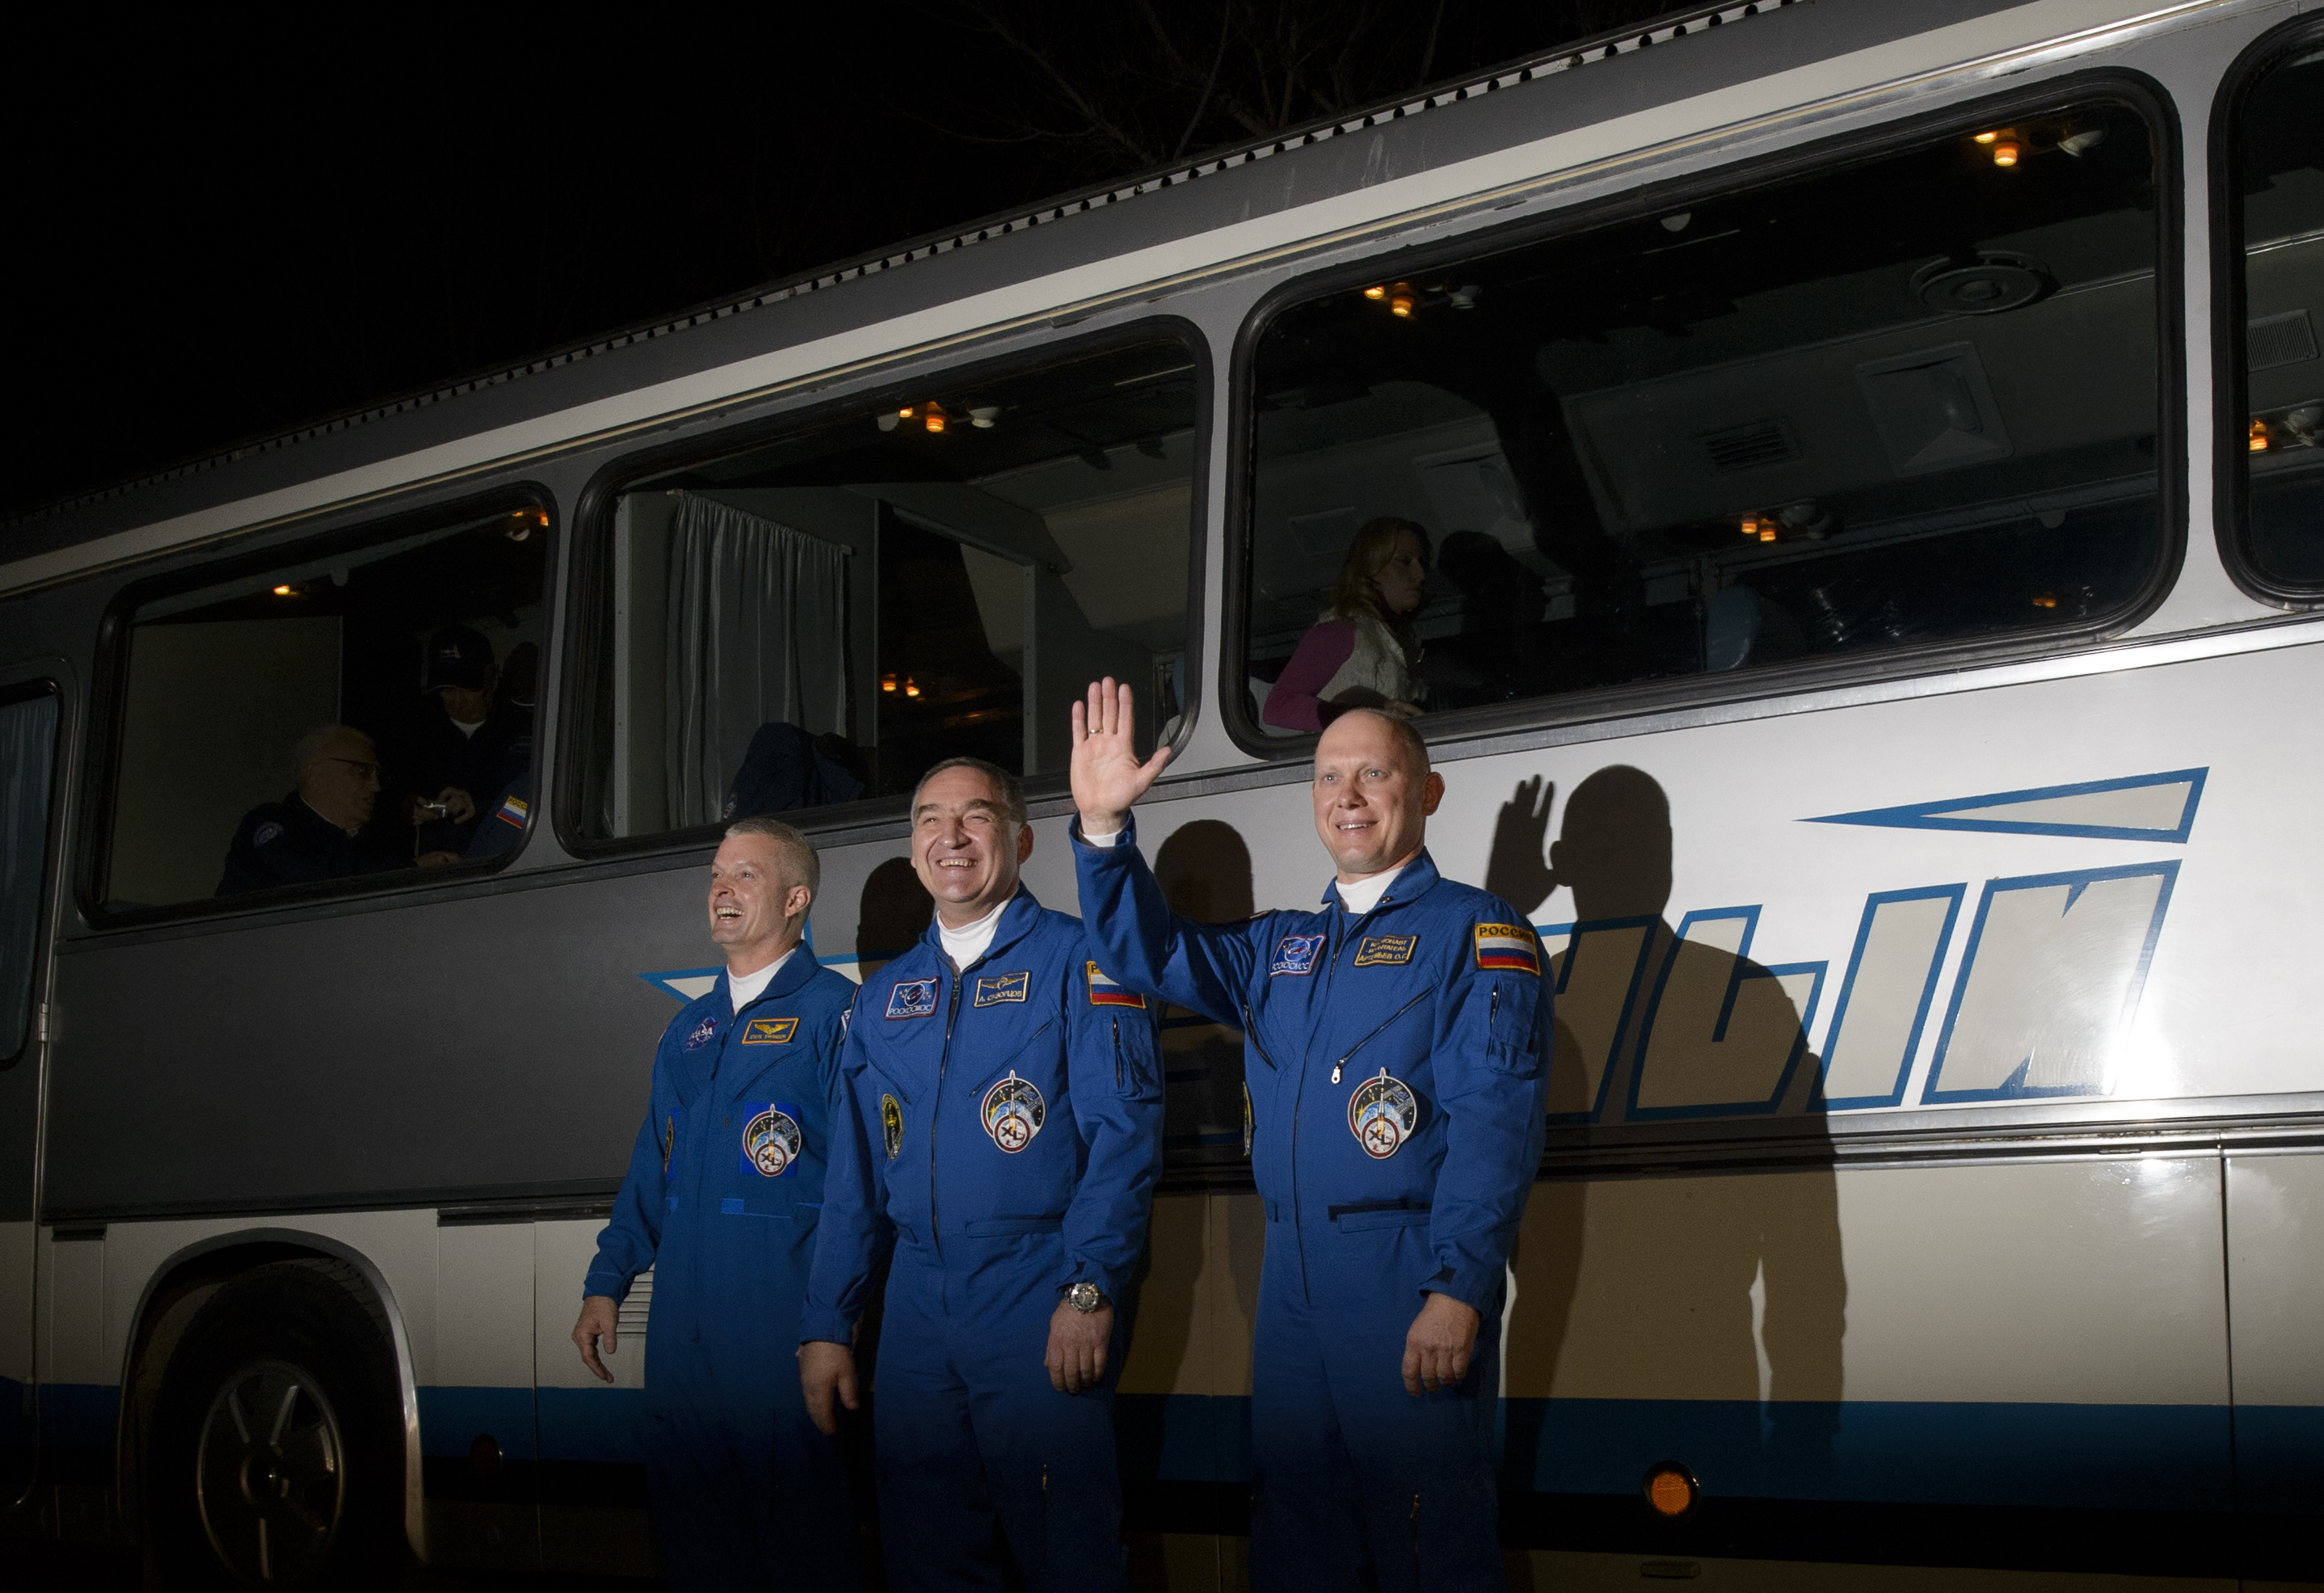 American astronaut Steve Swanson, left, and cosmonauts Alexander Skvortsov and Oleg Artemyev, are seen as they depart the Cosmonaut Hotel, Tuesday, March 25, 2014, in Baikonur, Kazakhstan, prior to their launch aboard a Soyuz rocket